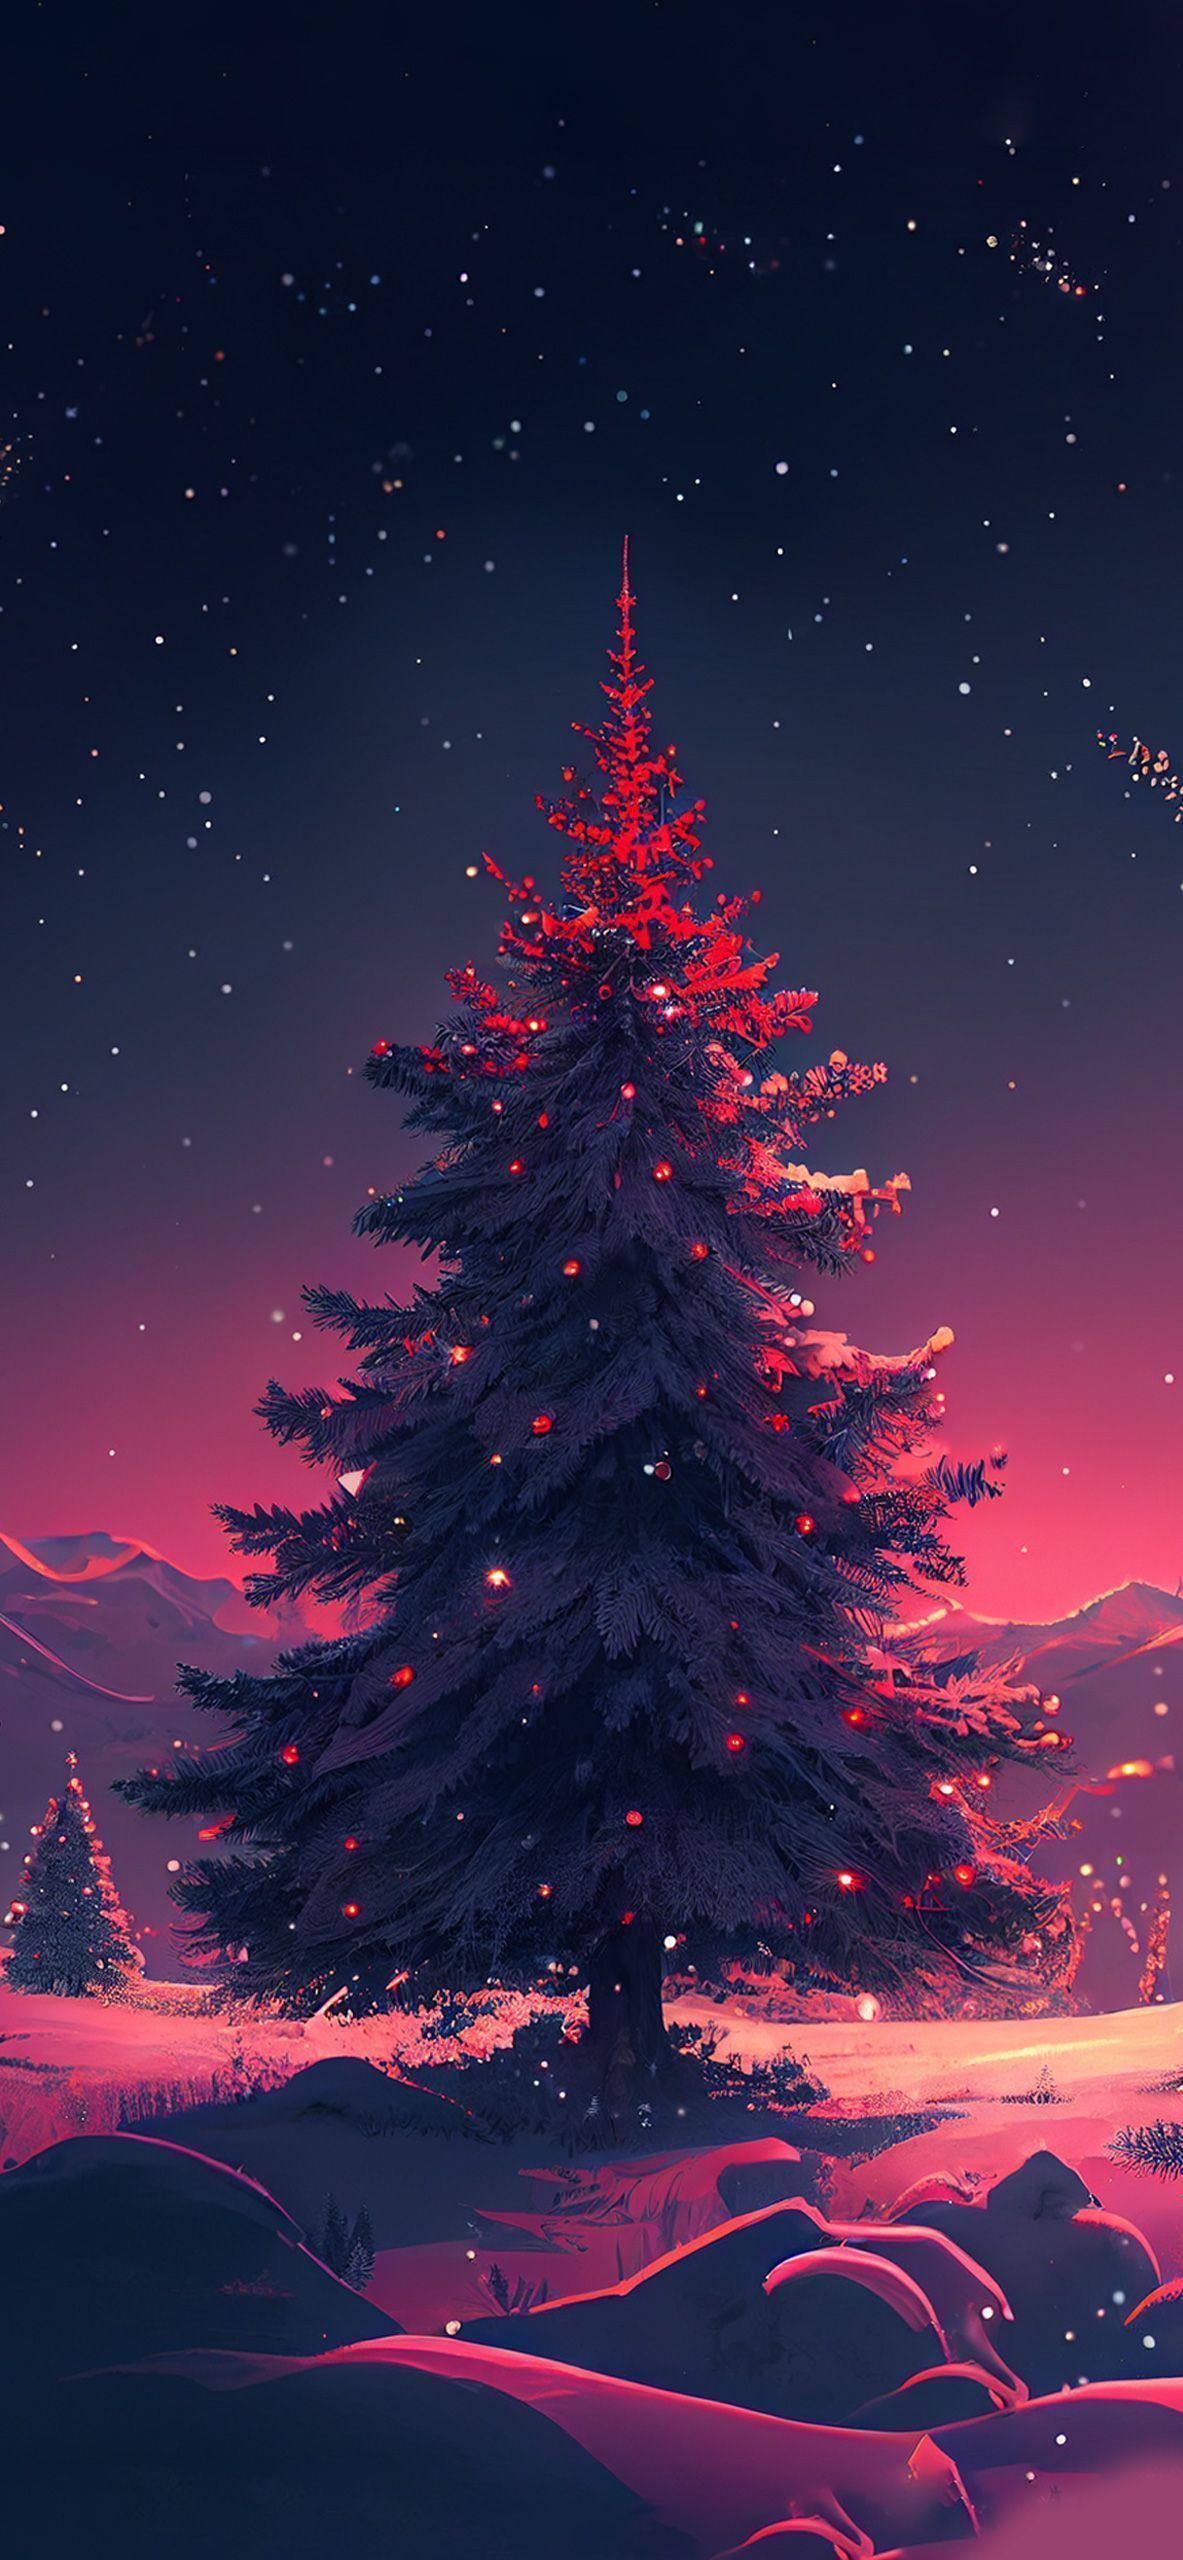 Christmas tree in the snow at night wallpaper 1242x2688 - Christmas iPhone